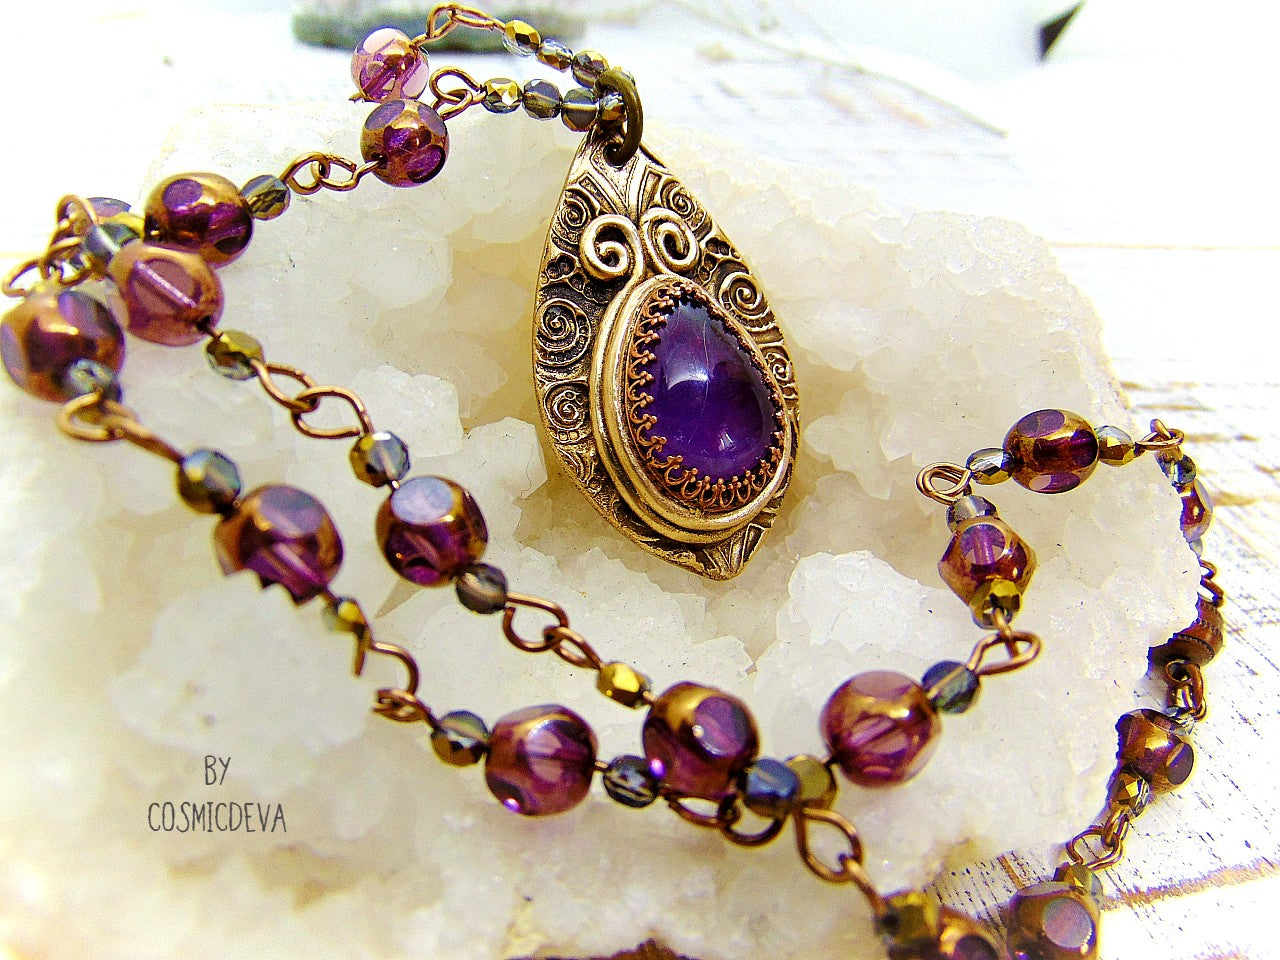 This unique Amethyst Pendant Necklace is an exquisite combination of modern and vintage. Hand sculptured in solid bronze with an elegant swirl texture and natural amethyst gemstone, its Boho gypsy style is complemented with a complete handmade rosary wire chain of purple gold faceted Czech glass beads.